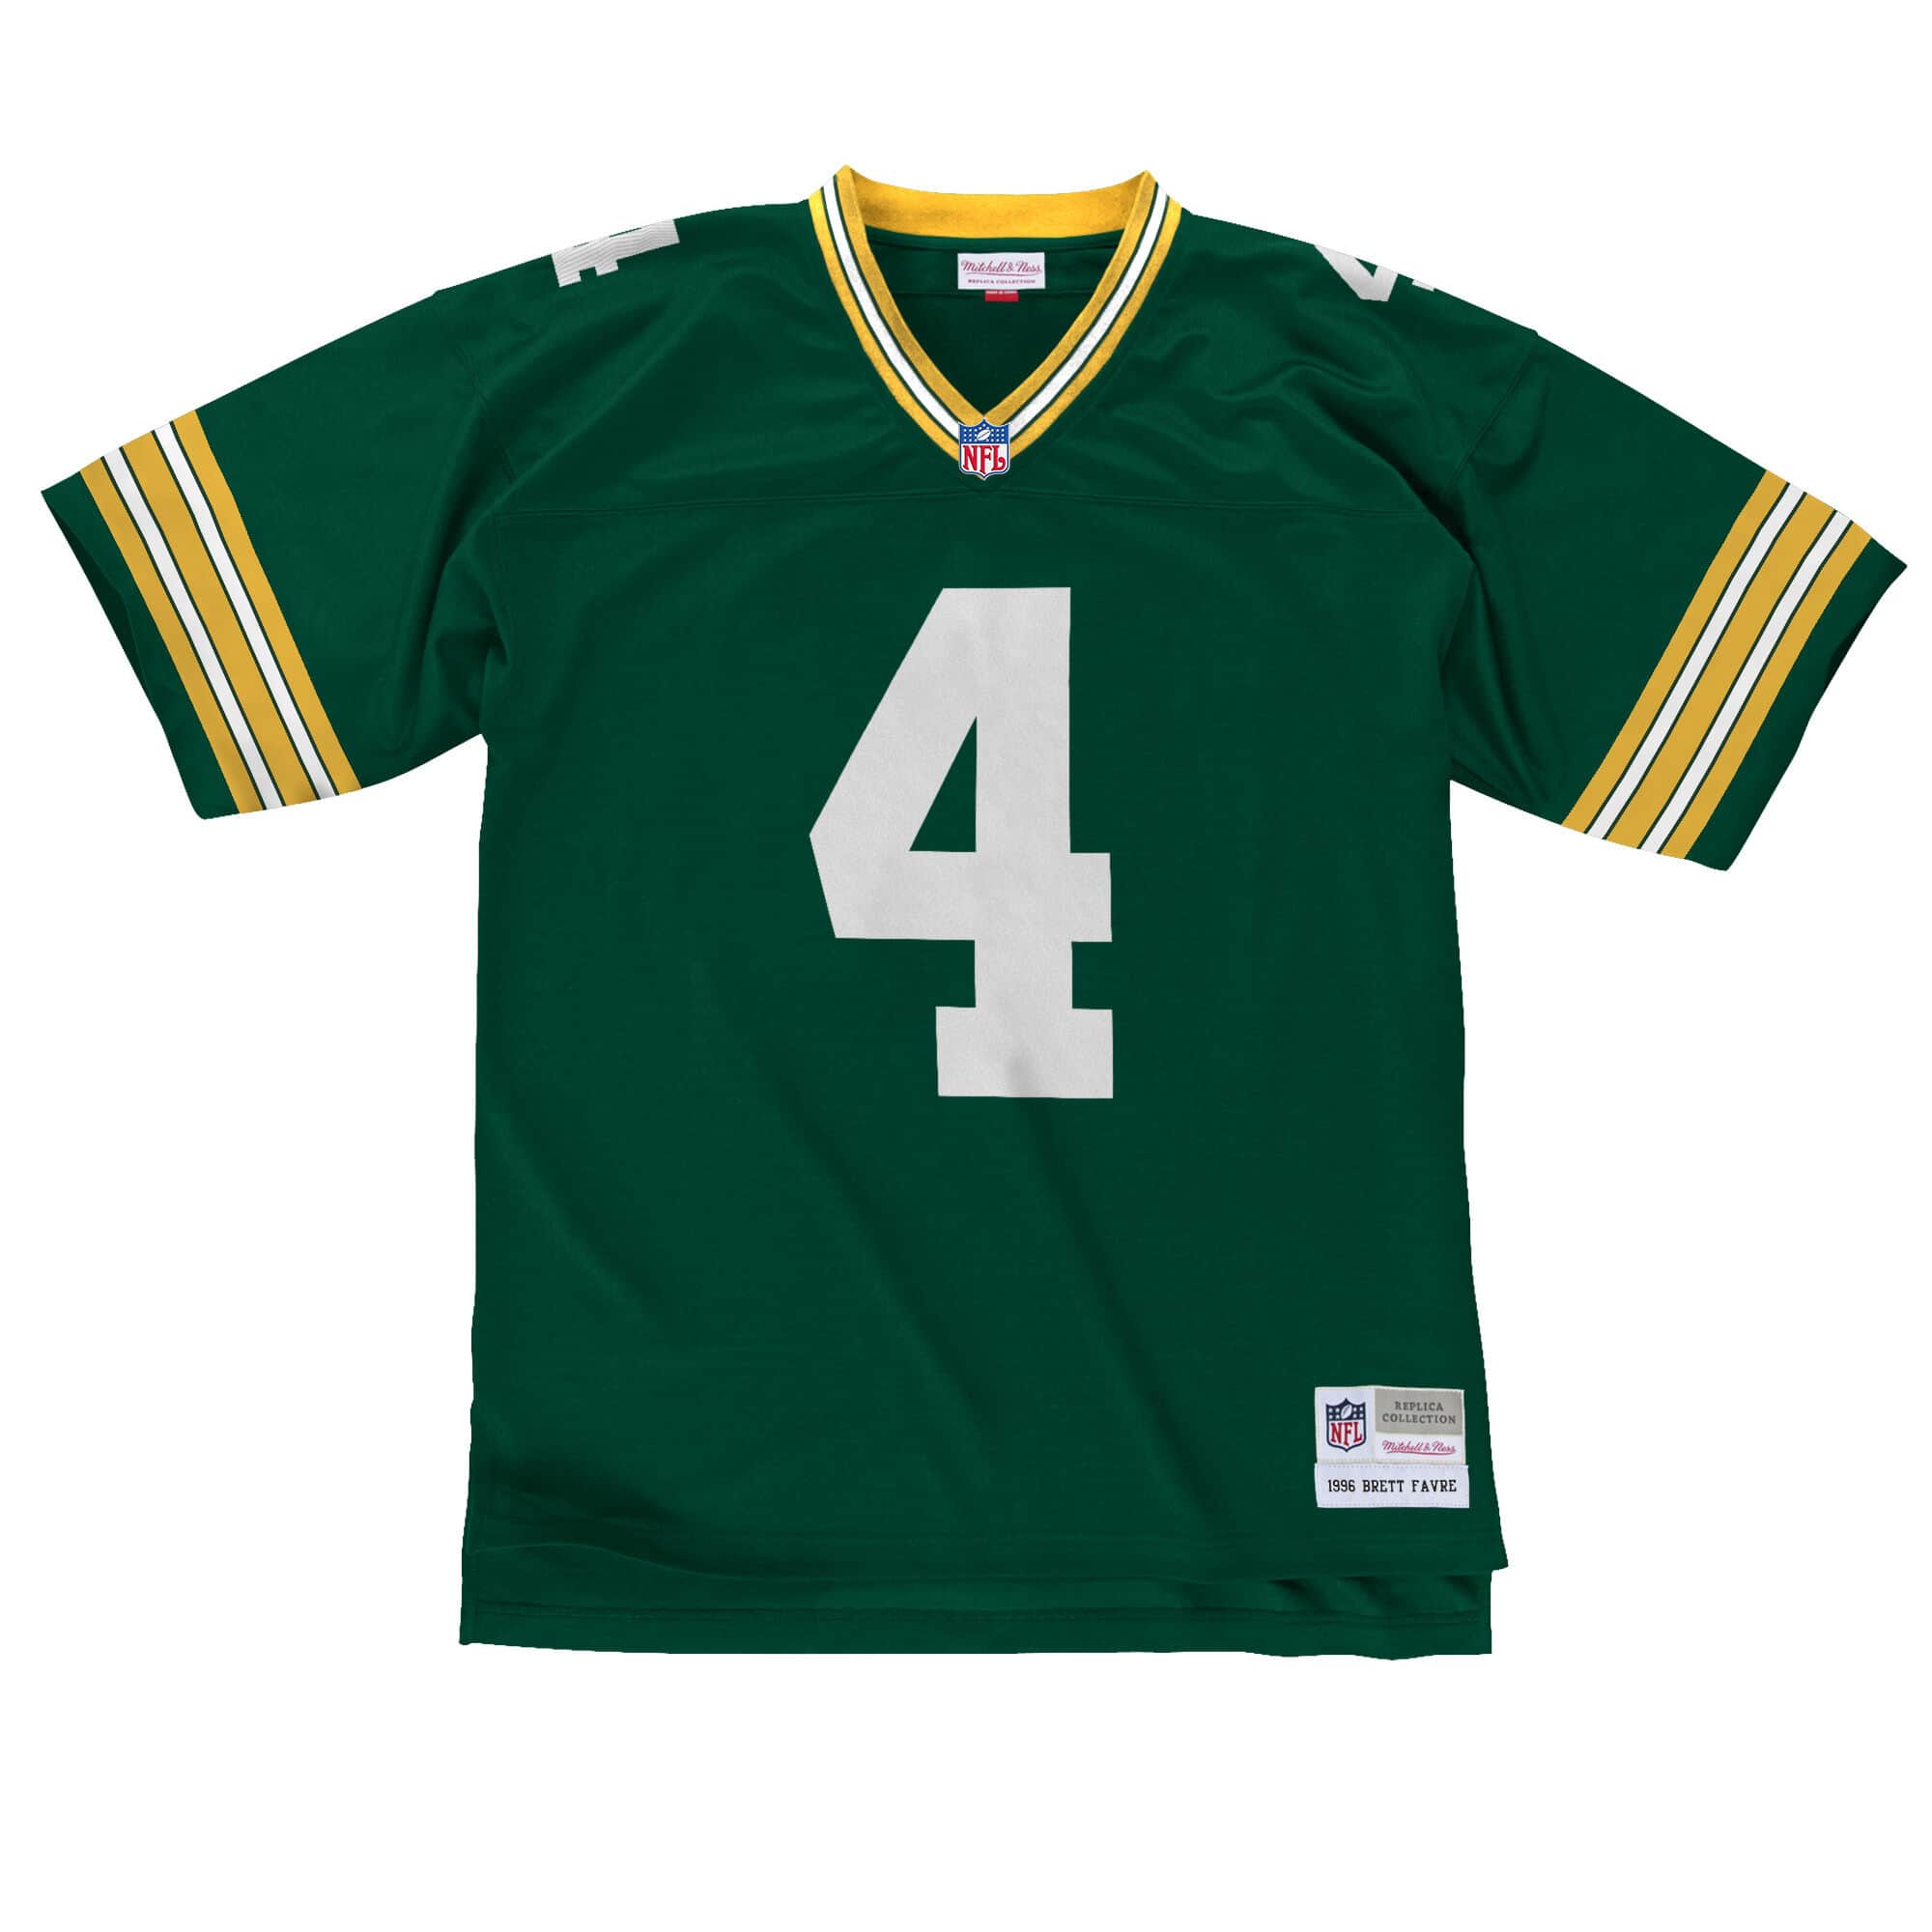 new packers uniforms